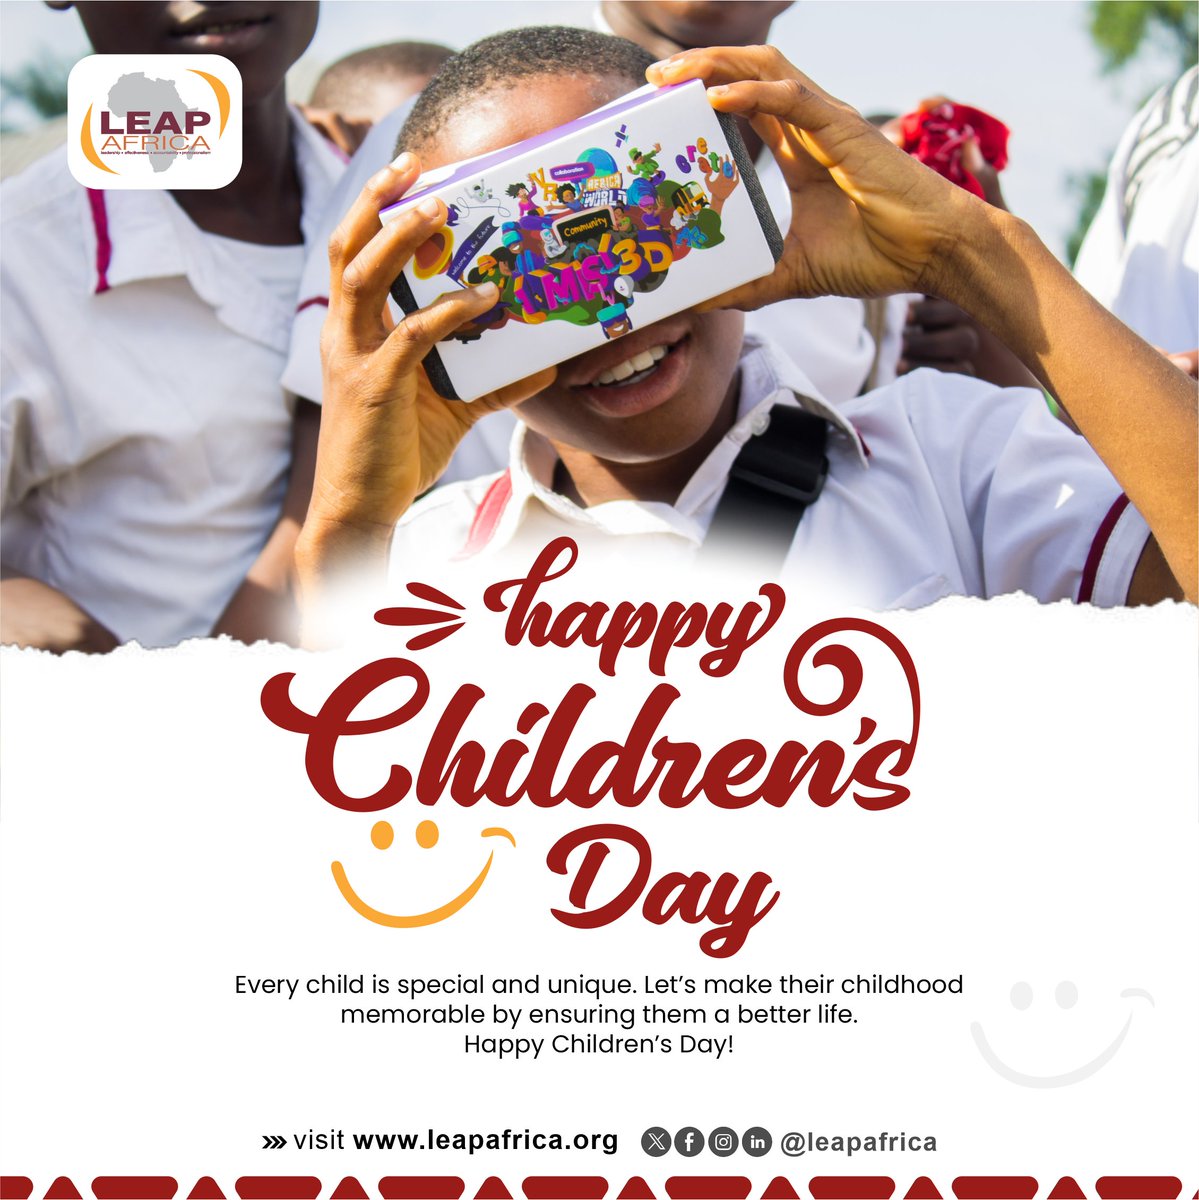 Every Child is Unique and Special. Happy Children's Day. #ChildrensDay #LEAPAfrica #FutureLeaders